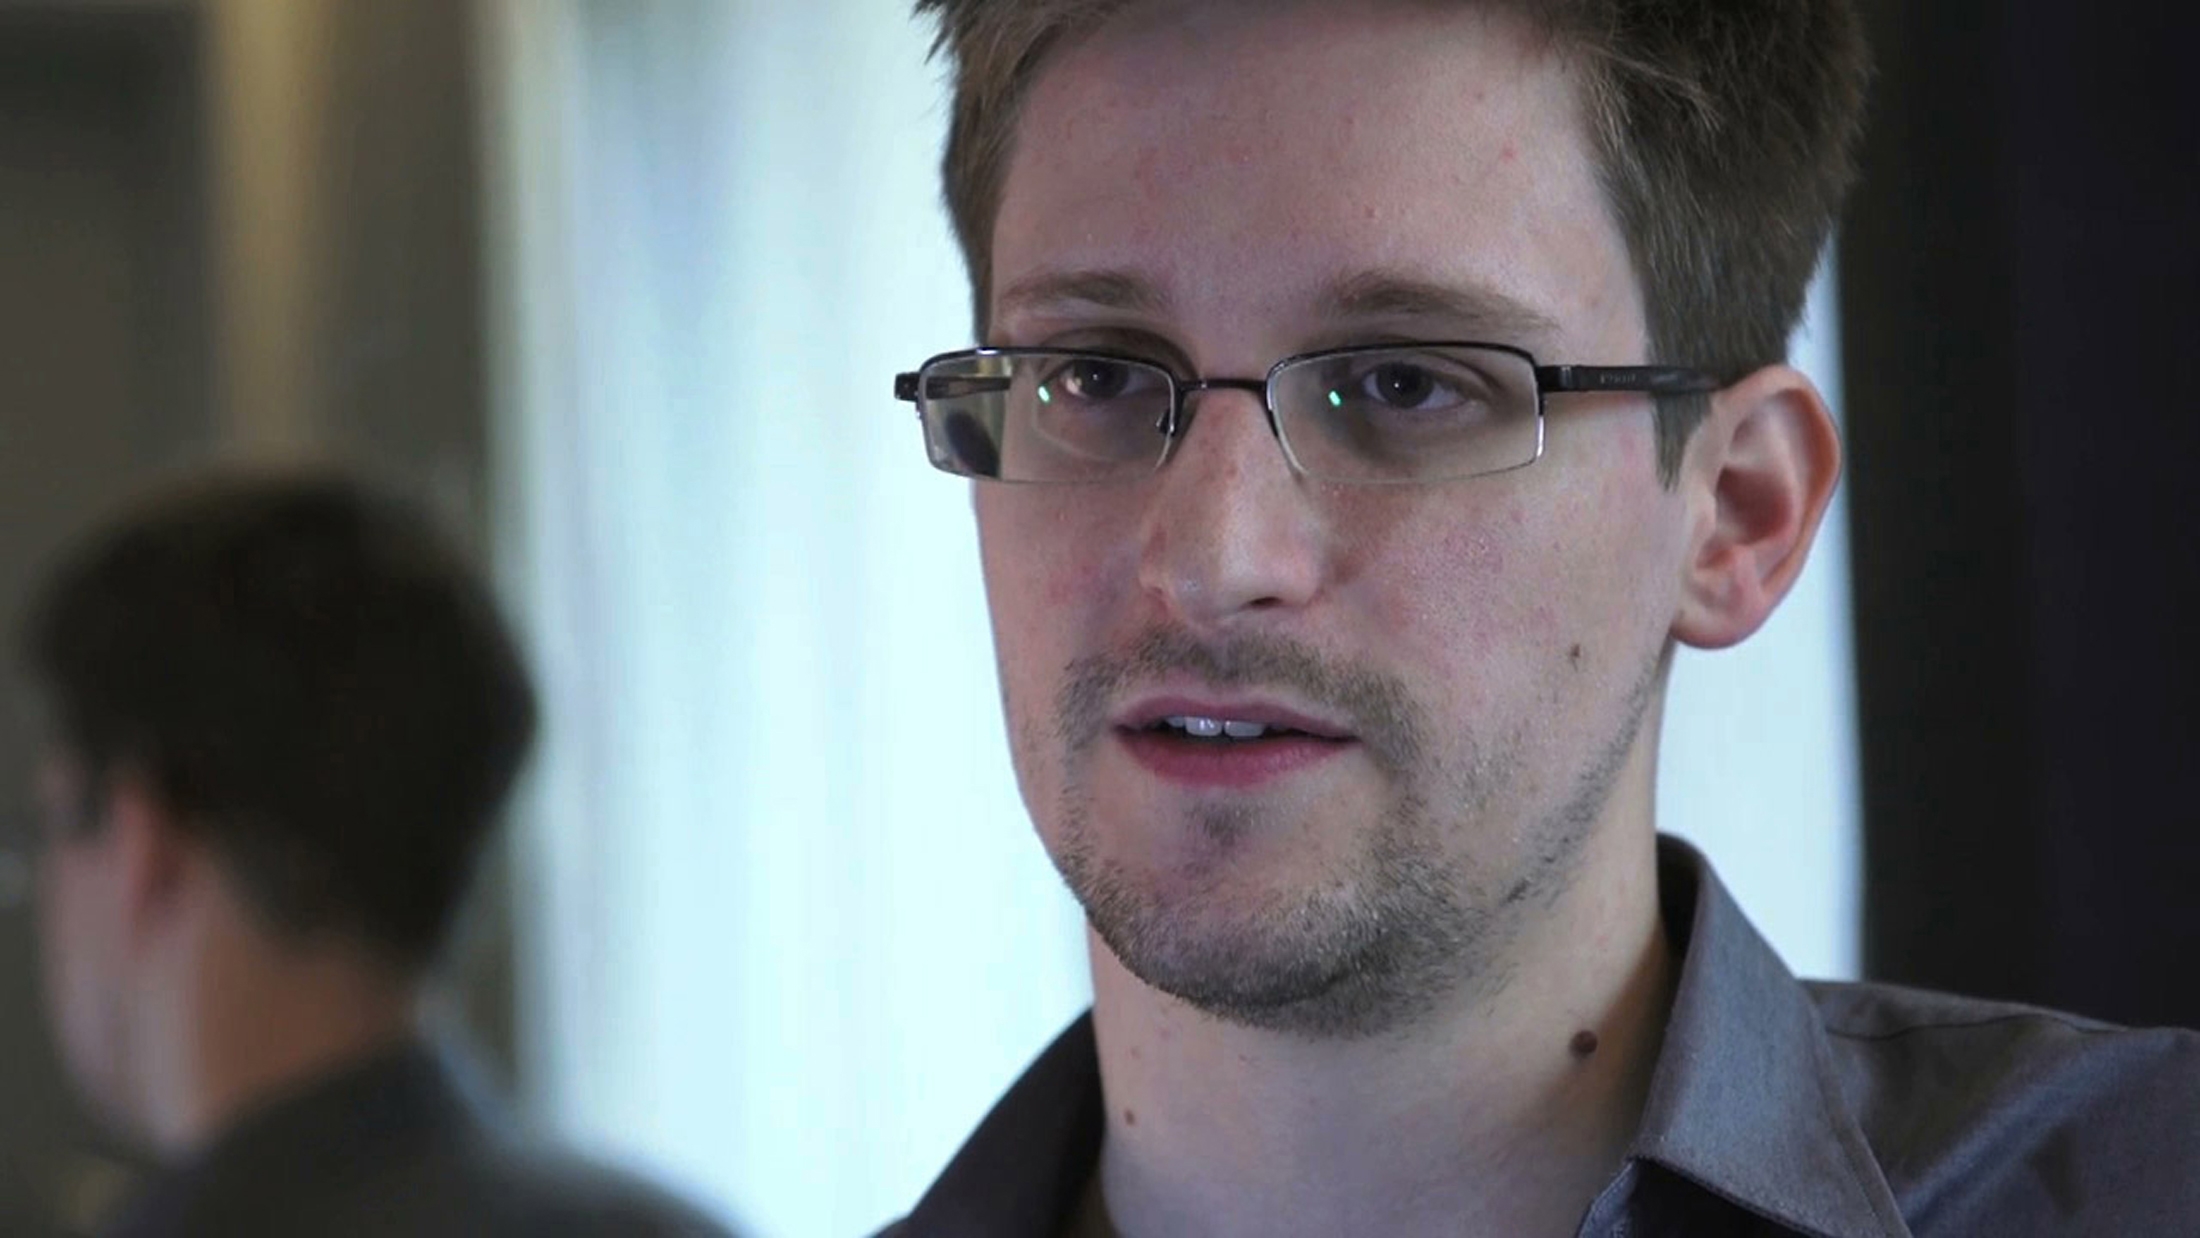 Edward Snowden is seen in this still image taken from video during an interview by The Guardian in his hotel room in Hong Kong, on June 6, 2013. (Glenn Greenwald/Laura Poitras—The Guardian/Reuters)